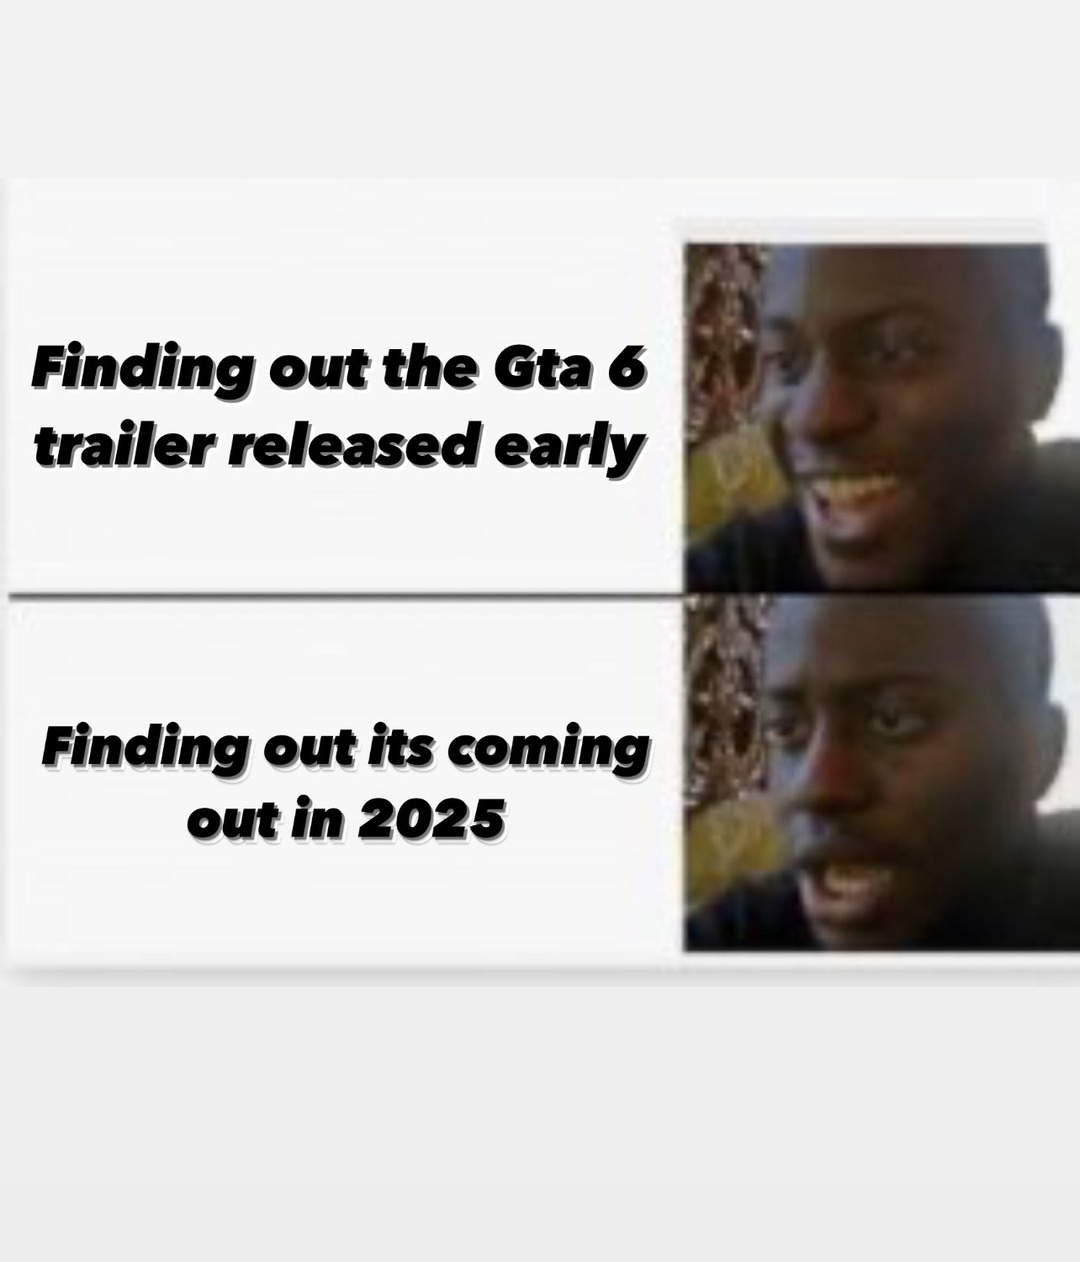 Watch its just going be trailer 2 in 2025  - meme